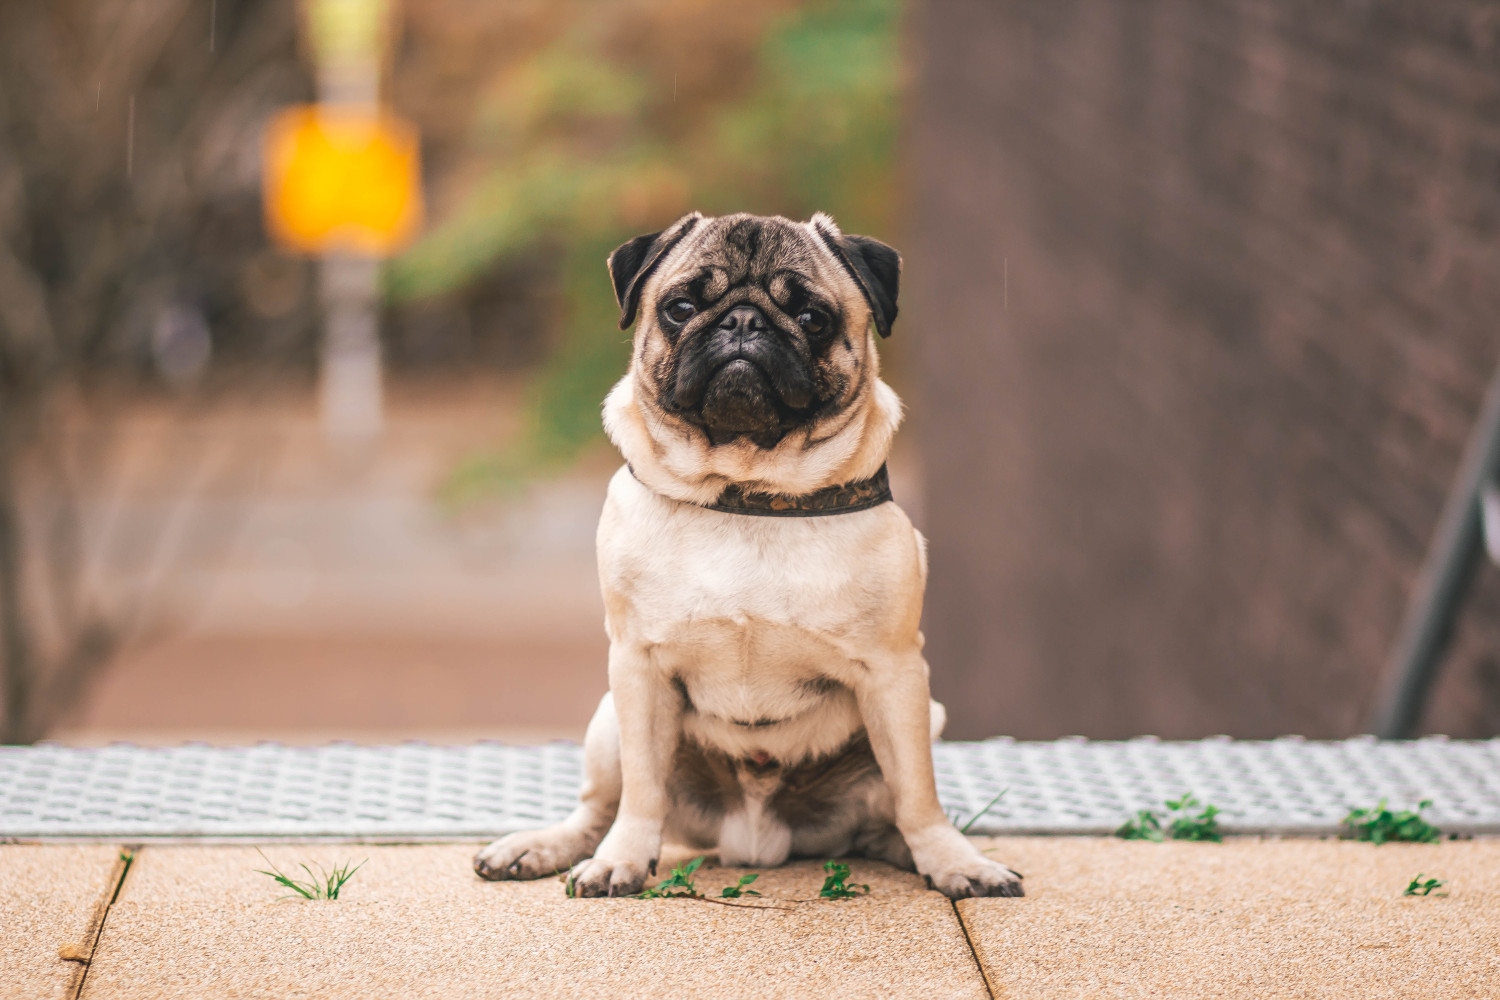 A Pug standing on a step - Best Dog Breeds for Pet Therapy - Focus Care